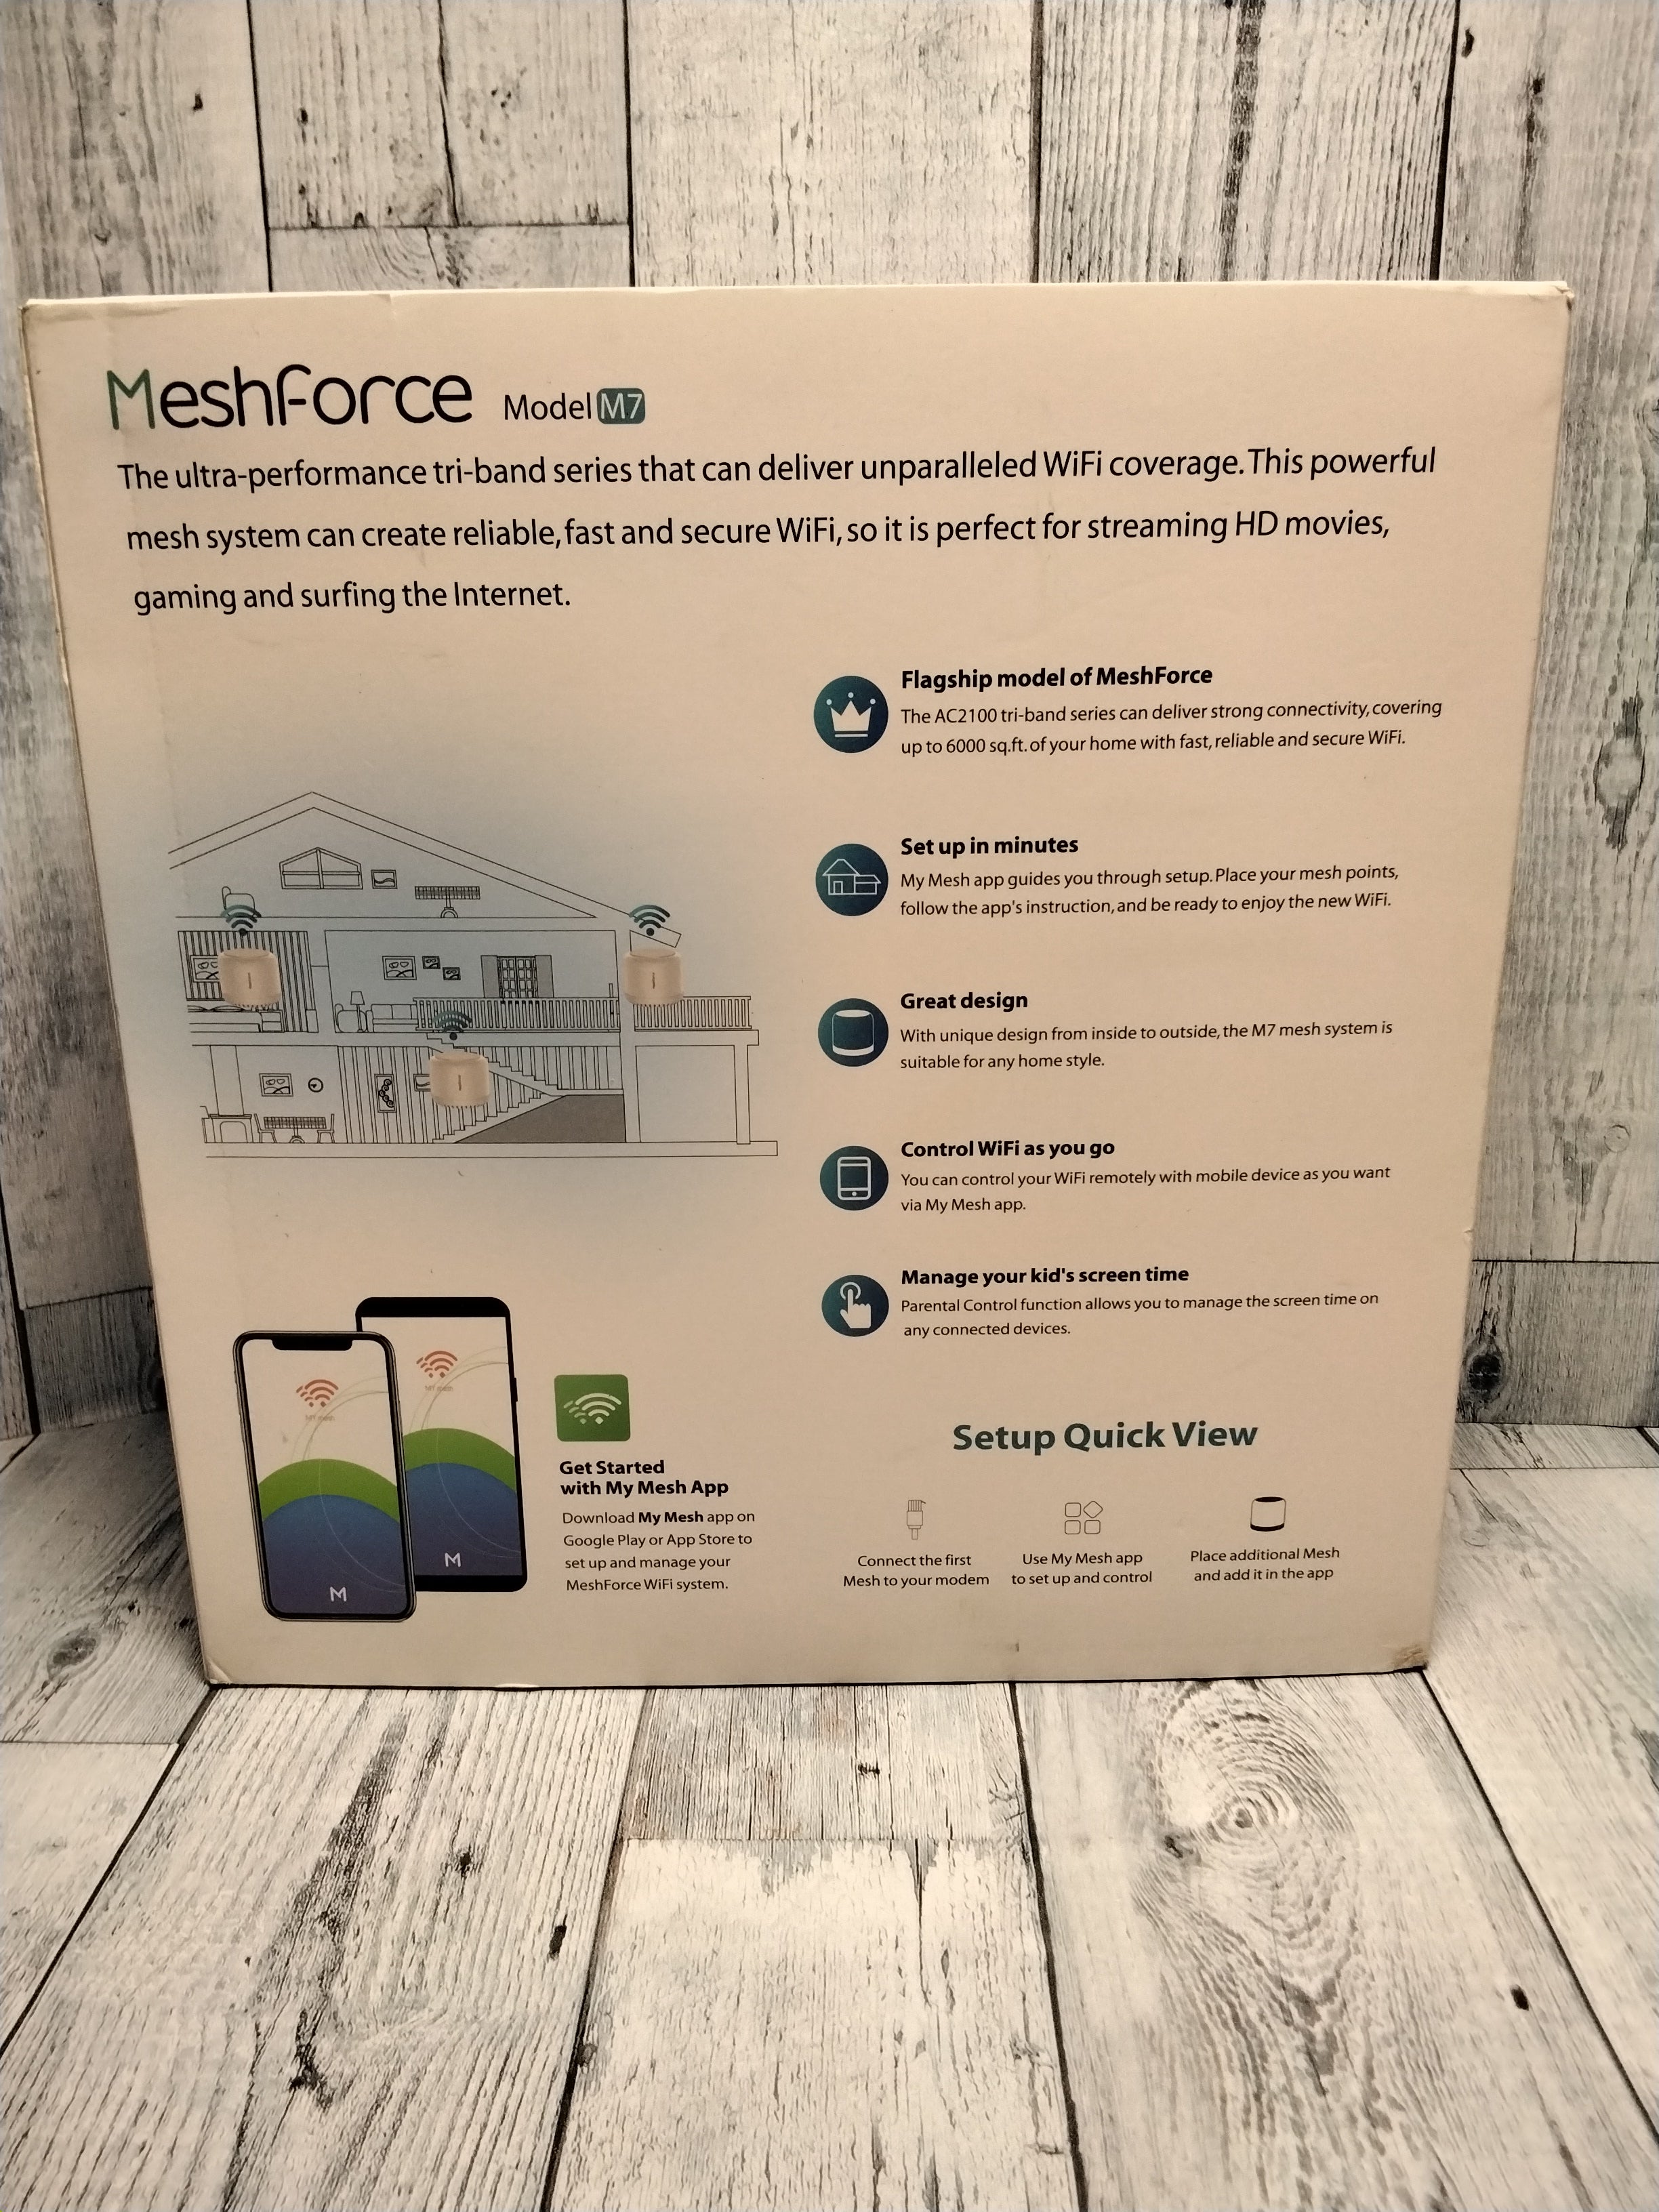 Meshforce M7 Tri-Band Whole Home Mesh WiFi System (3 Pack),WiFi Routers (7780161814766)